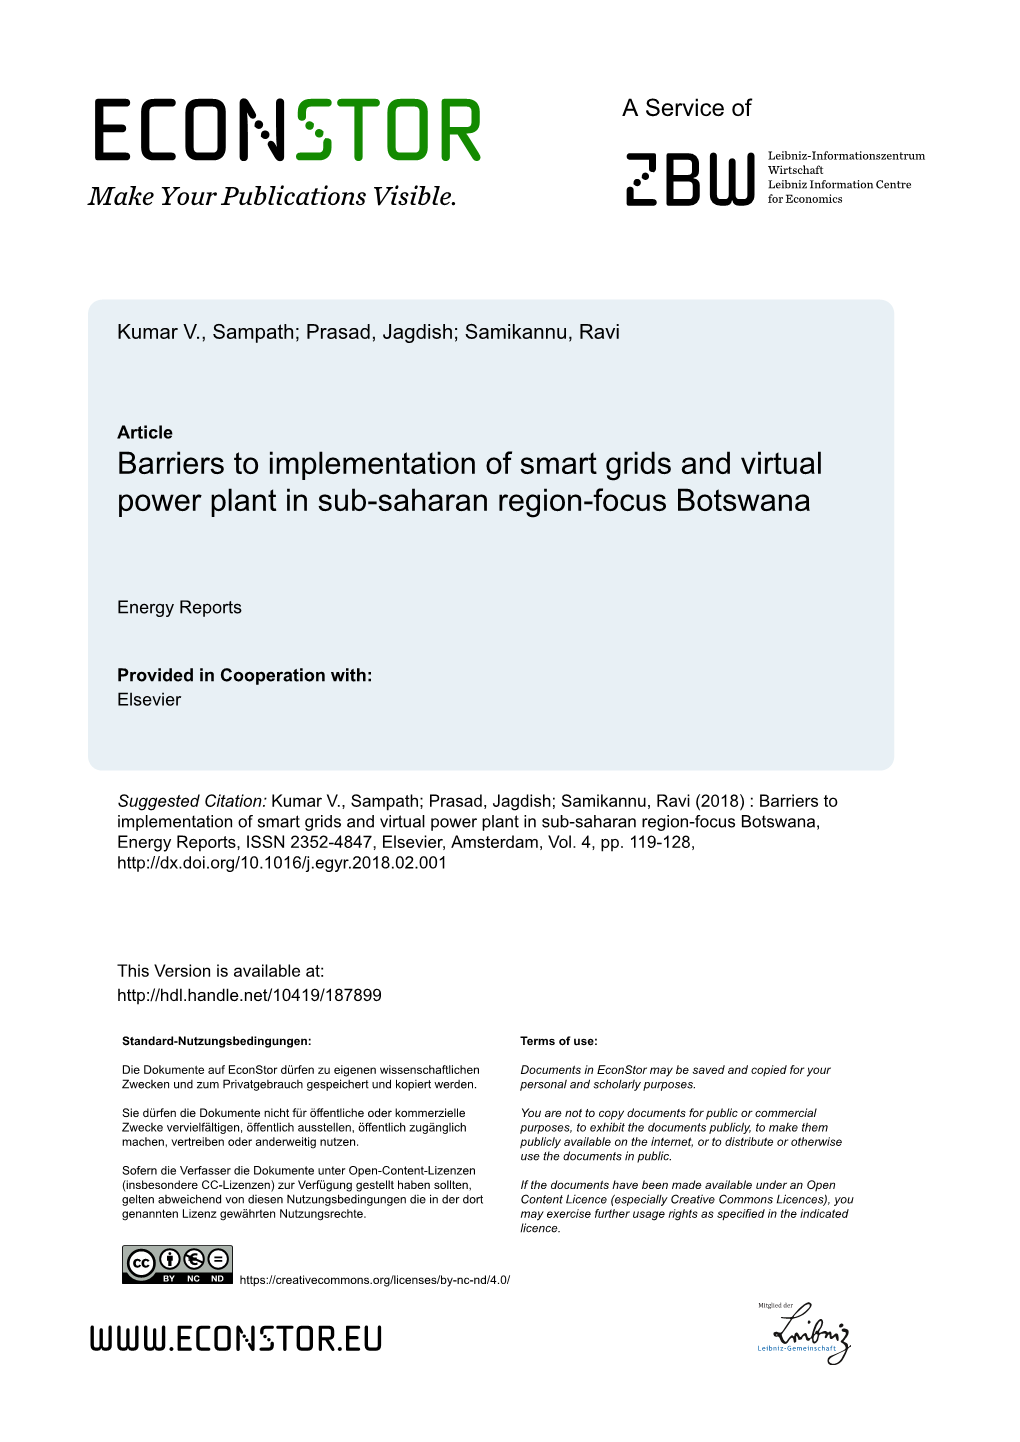 Barriers to Implementation of Smart Grids and Virtual Power Plant in Sub-Saharan Region-Focus Botswana